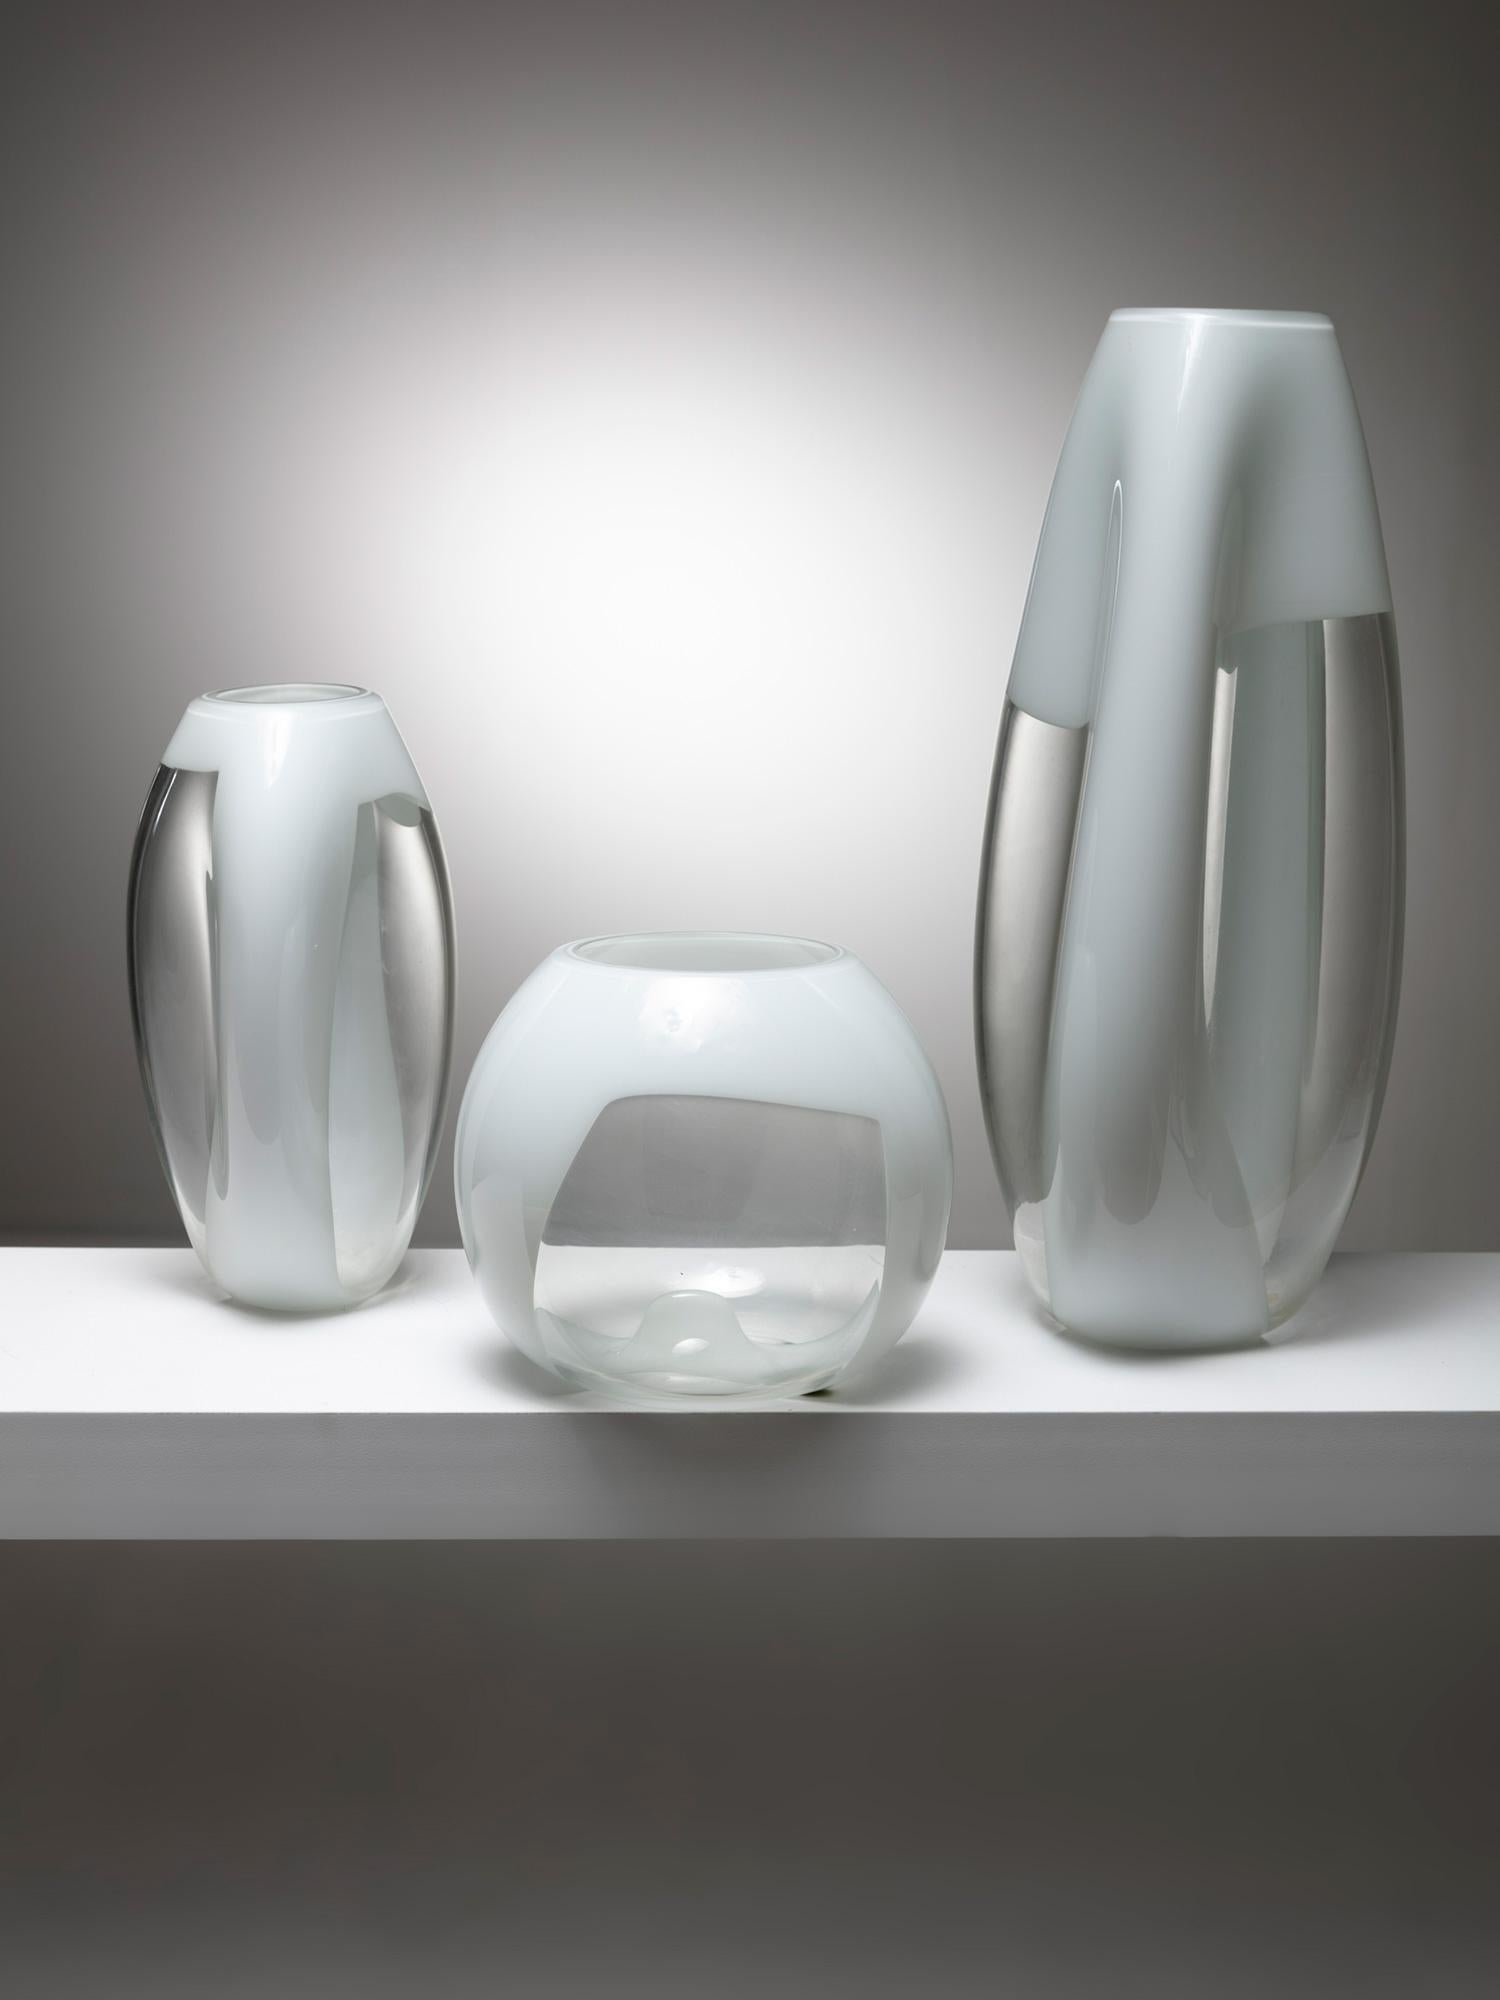 Glass vases models S614 S615 and S616 by Vetreria Vistosi.
Cristal vase with milky glass bands.
Size refers to the tallest piece.
Literature available upon request.